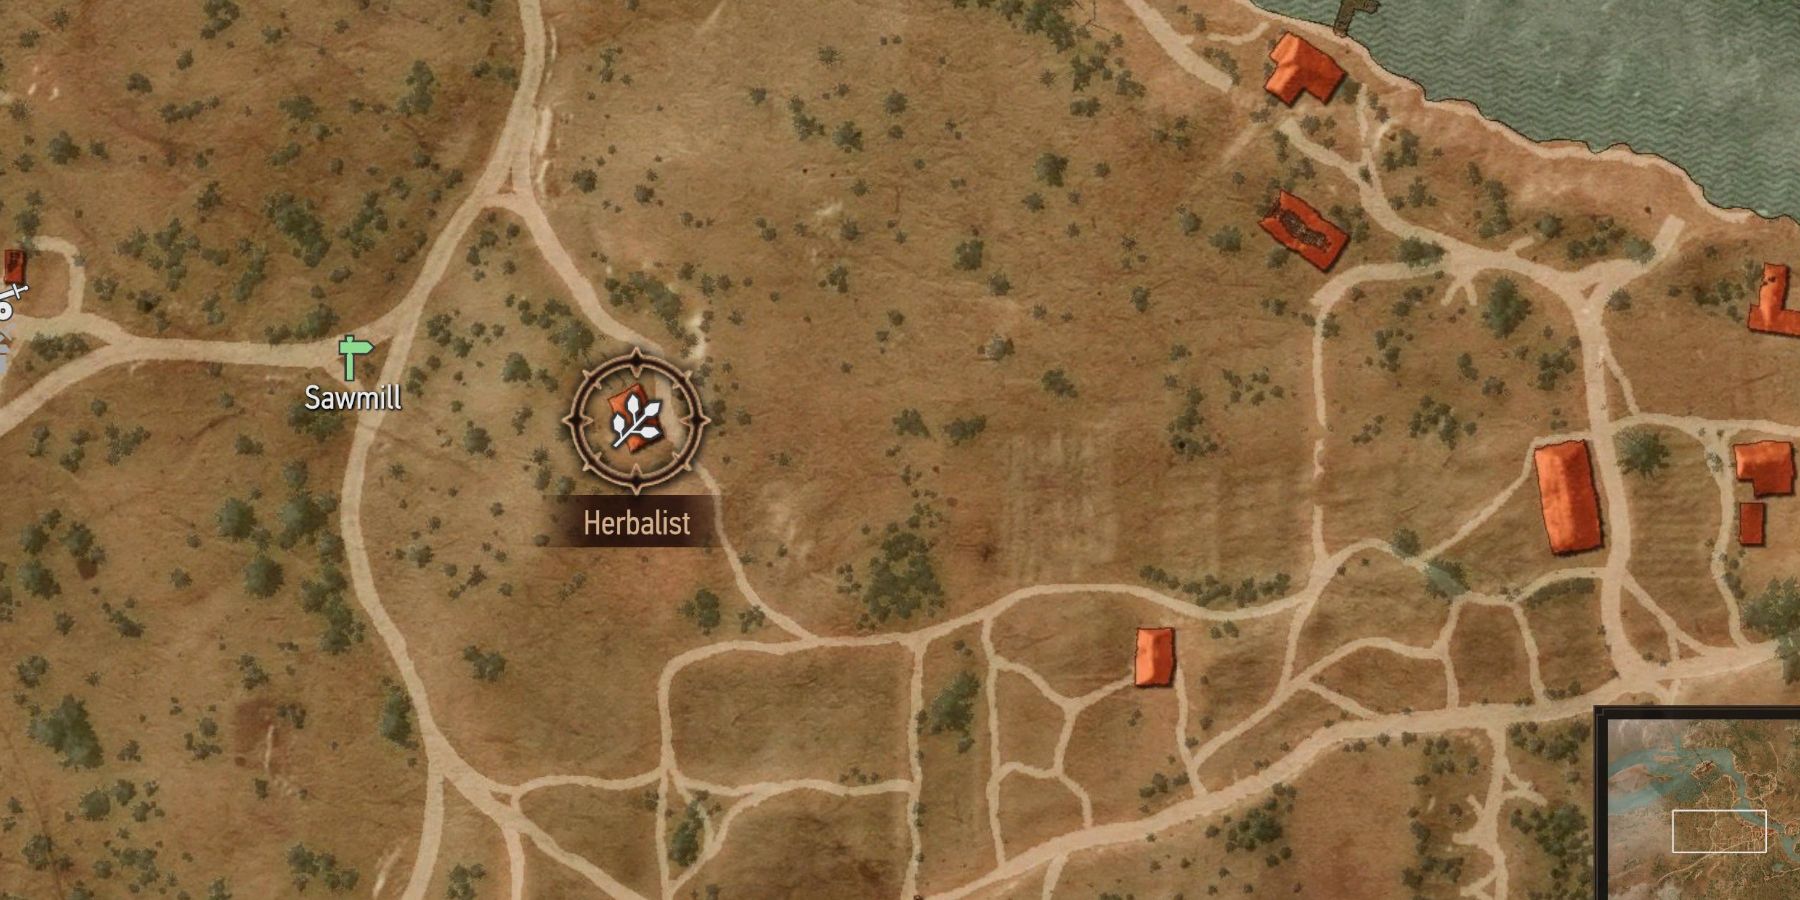 Witcher 3 Tomira's hut on the map